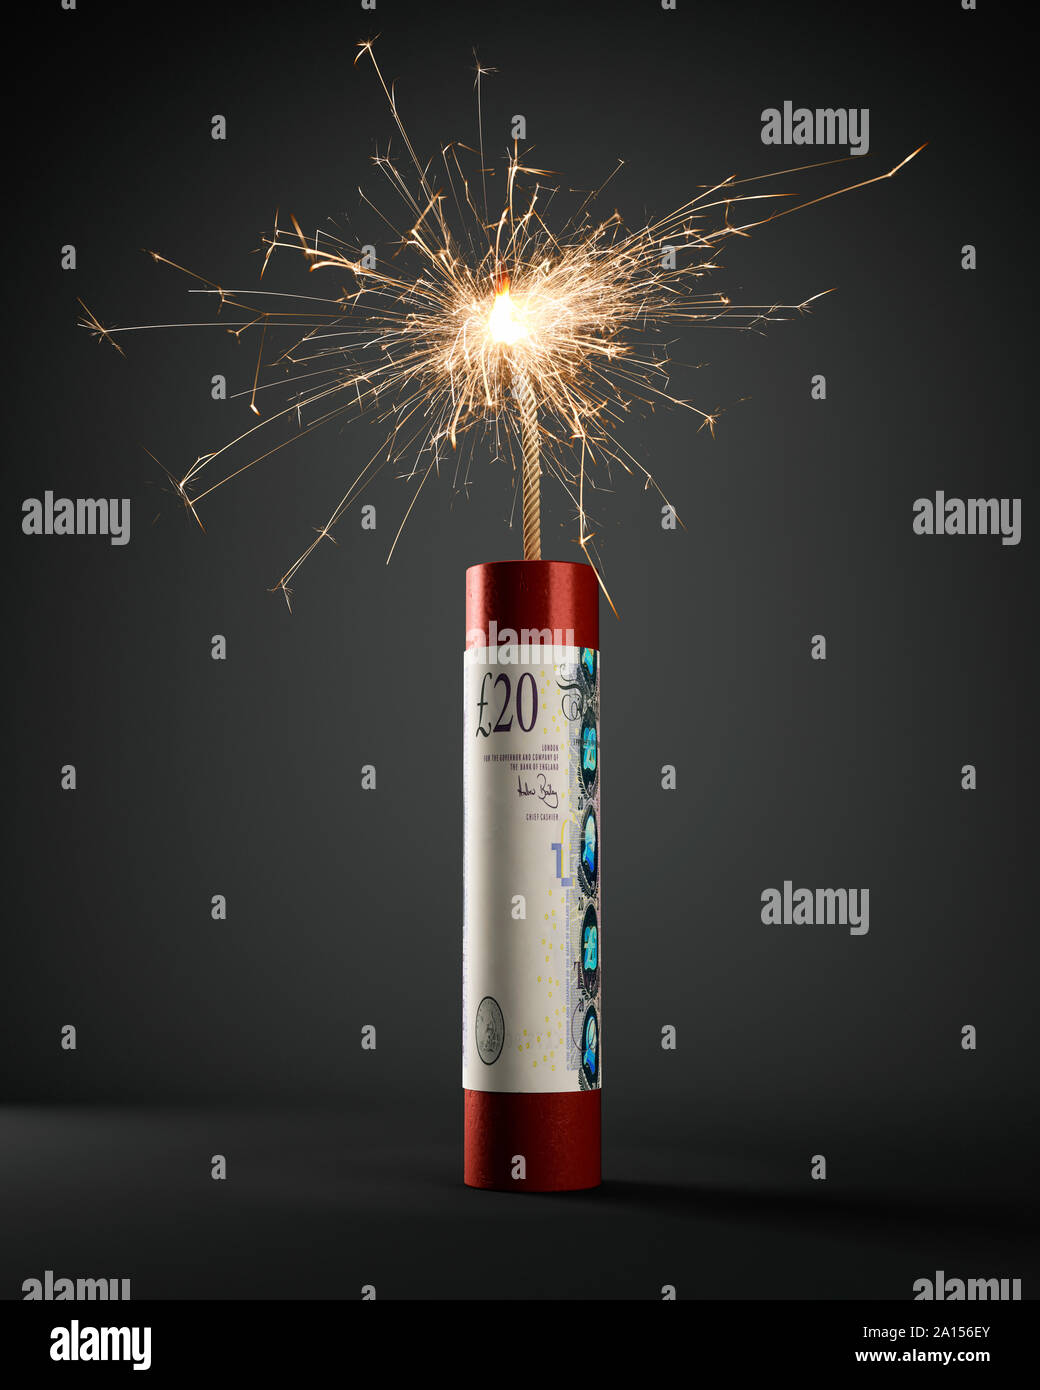 Stick of dynamite with 20 pound note GBP sterling, lit and burning Stock Photo